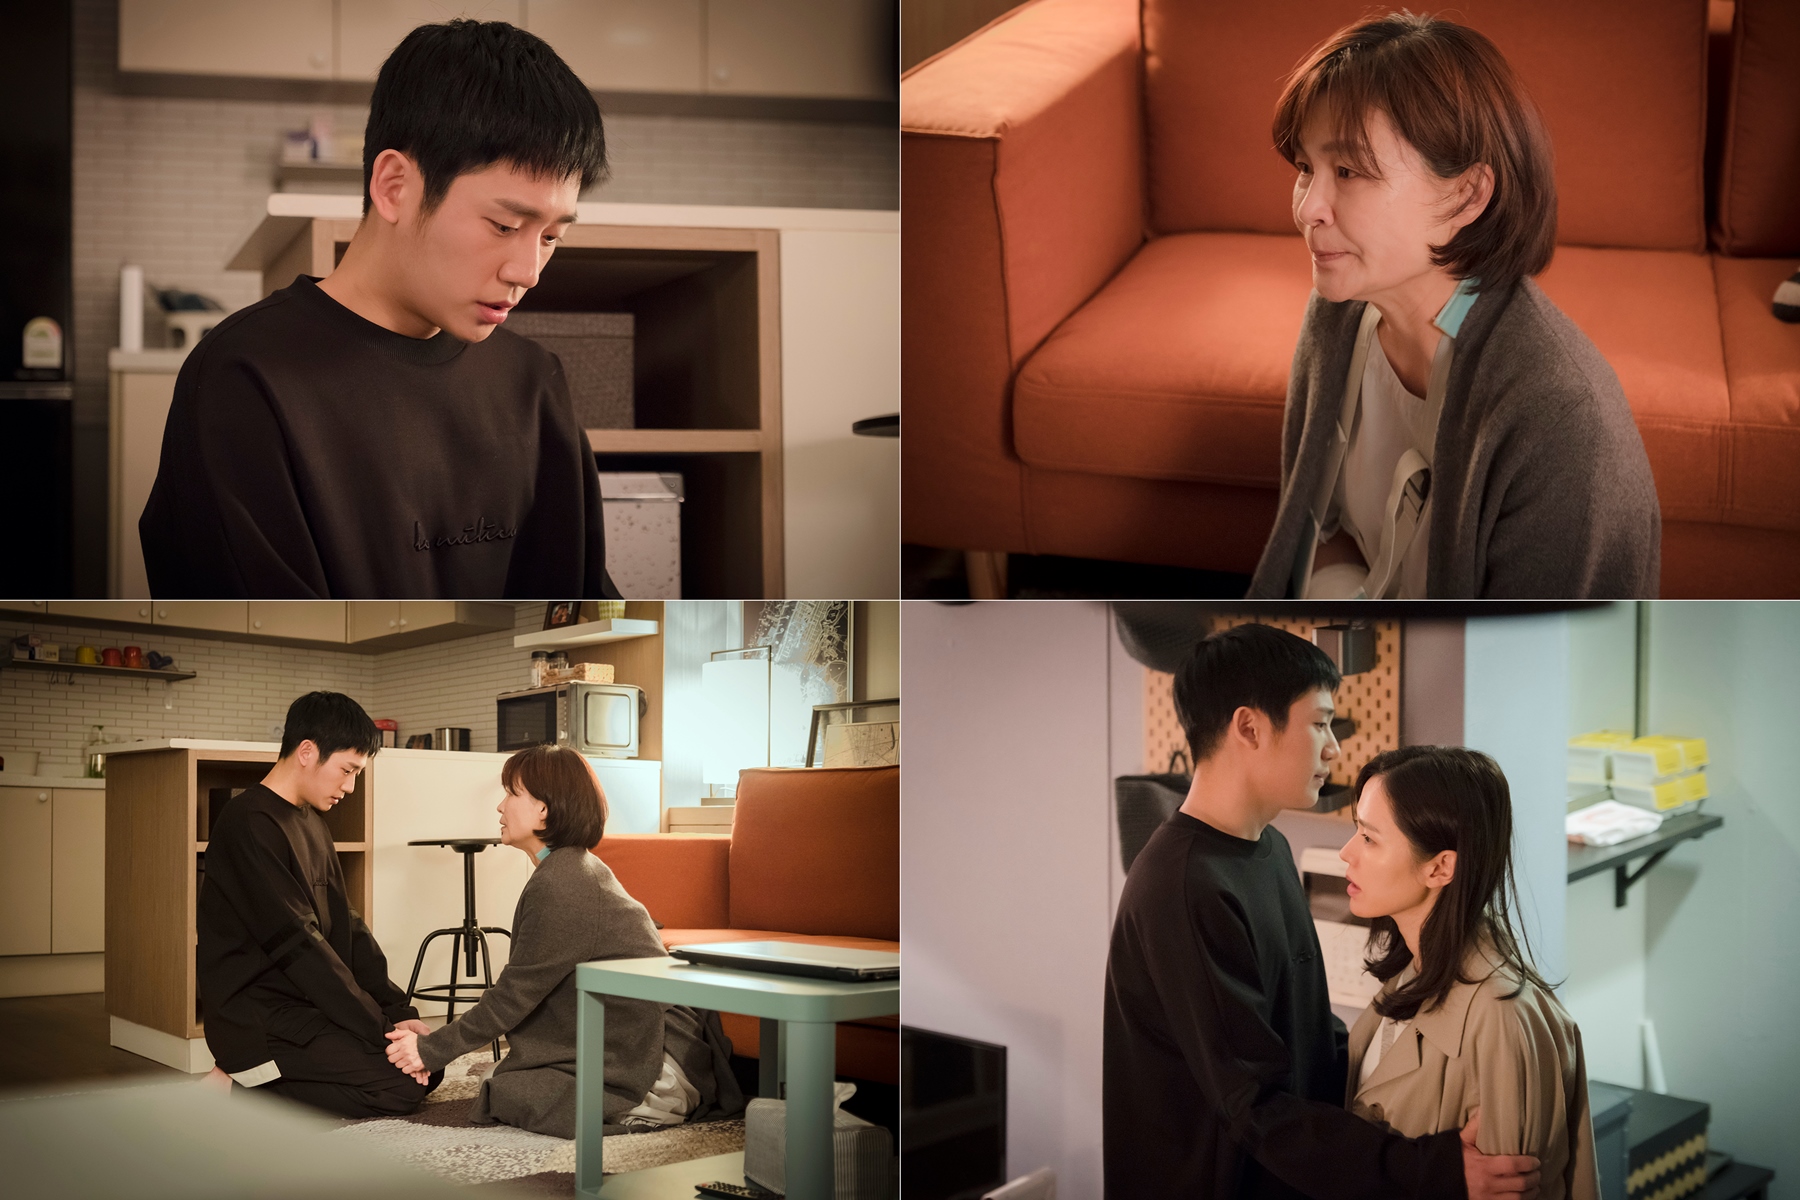 Son Ye-jin and Jung Hae In, and mother Hae-yoen Gil, will face three-way faces that they did not want.JTBCs Golden Earth Drama , Beautiful Sister (hereinafter Beautiful Sister) (played by Kim Eun and directed by Ahn Pan-seok) is a three-way face-to-face Steel Series that is woven by Yoon Jin-ah (Son Ye-jin), Seo Jun-hee (Jung Hae In), and Kim Mi-yeon (Hae-yoen Gil) ahead of the 11th broadcast today (on the 4th). We have released the release.After the release of the love affair, what kind of Danger came to Jina and Junhee who are walking along the thorny field with Mi-yeons extreme opposition again?Mi-yeon, who learned about the relationship between Jin-ah and Jun-hee, strongly opposed it as expected.As soon as her mother died, she set up a new family, and Junhees family, who lives with a father with a child, and who lives in a kite, does not meet Mi-yeons standards. Do parents live for a thousand years?Mi-yeon said, The younger brothers are all for Jun-hee, and they are left in Jin-ahs hands.He even visited the So-yeon Jang and said a lot, and persuaded other families to oppose Junhee.Mi-yeon, who saw Jin-ahs empty room at the end of the last 10 times and followed her straight away thinking that her daughter went to Jun-hees house.Mi-yeon, who hesitated in front of the front door, rang the doorbell, and the sweet moment of Jin-ah and Jun-hee was broken.It is noteworthy how these lovers will cope with Mi-yeon, who suddenly came.Inside the SteelSeries released today (4th), there are three-way faces of Jin-ah, Jun-hee and Mi-yeon.Jun-hee, who is kneeling in front of Mi-yeon, is sadly unable to lift his head.Mi-yeons expression to persuade Jun-hee is filled with a firmness not to break his will. Here, Jin-ah is trying to stop her mother, and the conflict between the three-party faces is predicted.In the 11th trailer released earlier, Jun-hee, Im okay, adds to the sadness that Jin-ah also tells each other that Im okay, I can endure everything.Today (the 4th) will also have a sweet melody of Jin-ah and Jun-hee, said an official. The two peoples love affair hit a big wall called Mom.We need to see how Jina and Junhee can get through Danger and keep their hard love to the end.